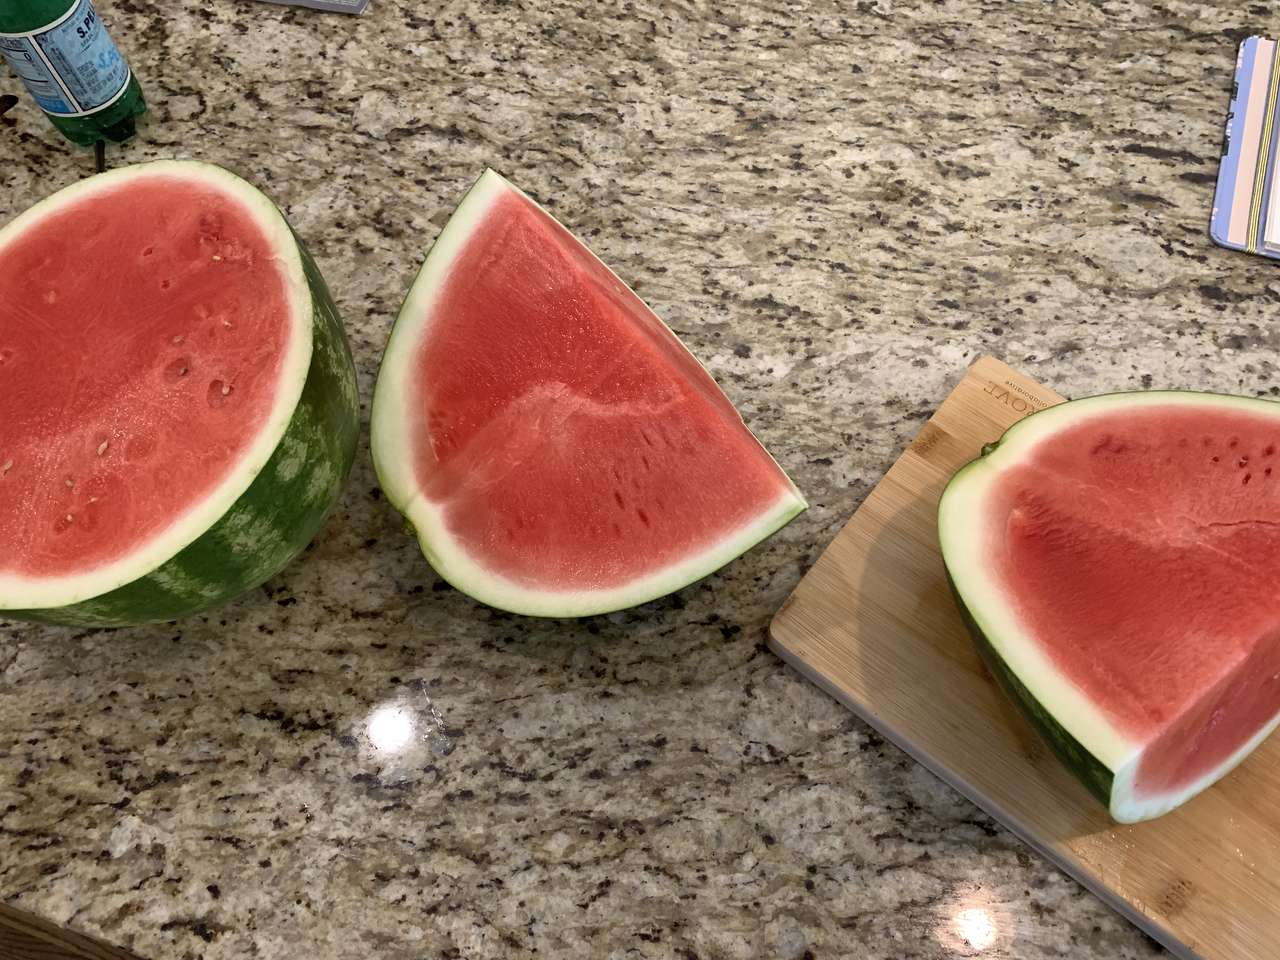 Watermelon puzzle online from photo